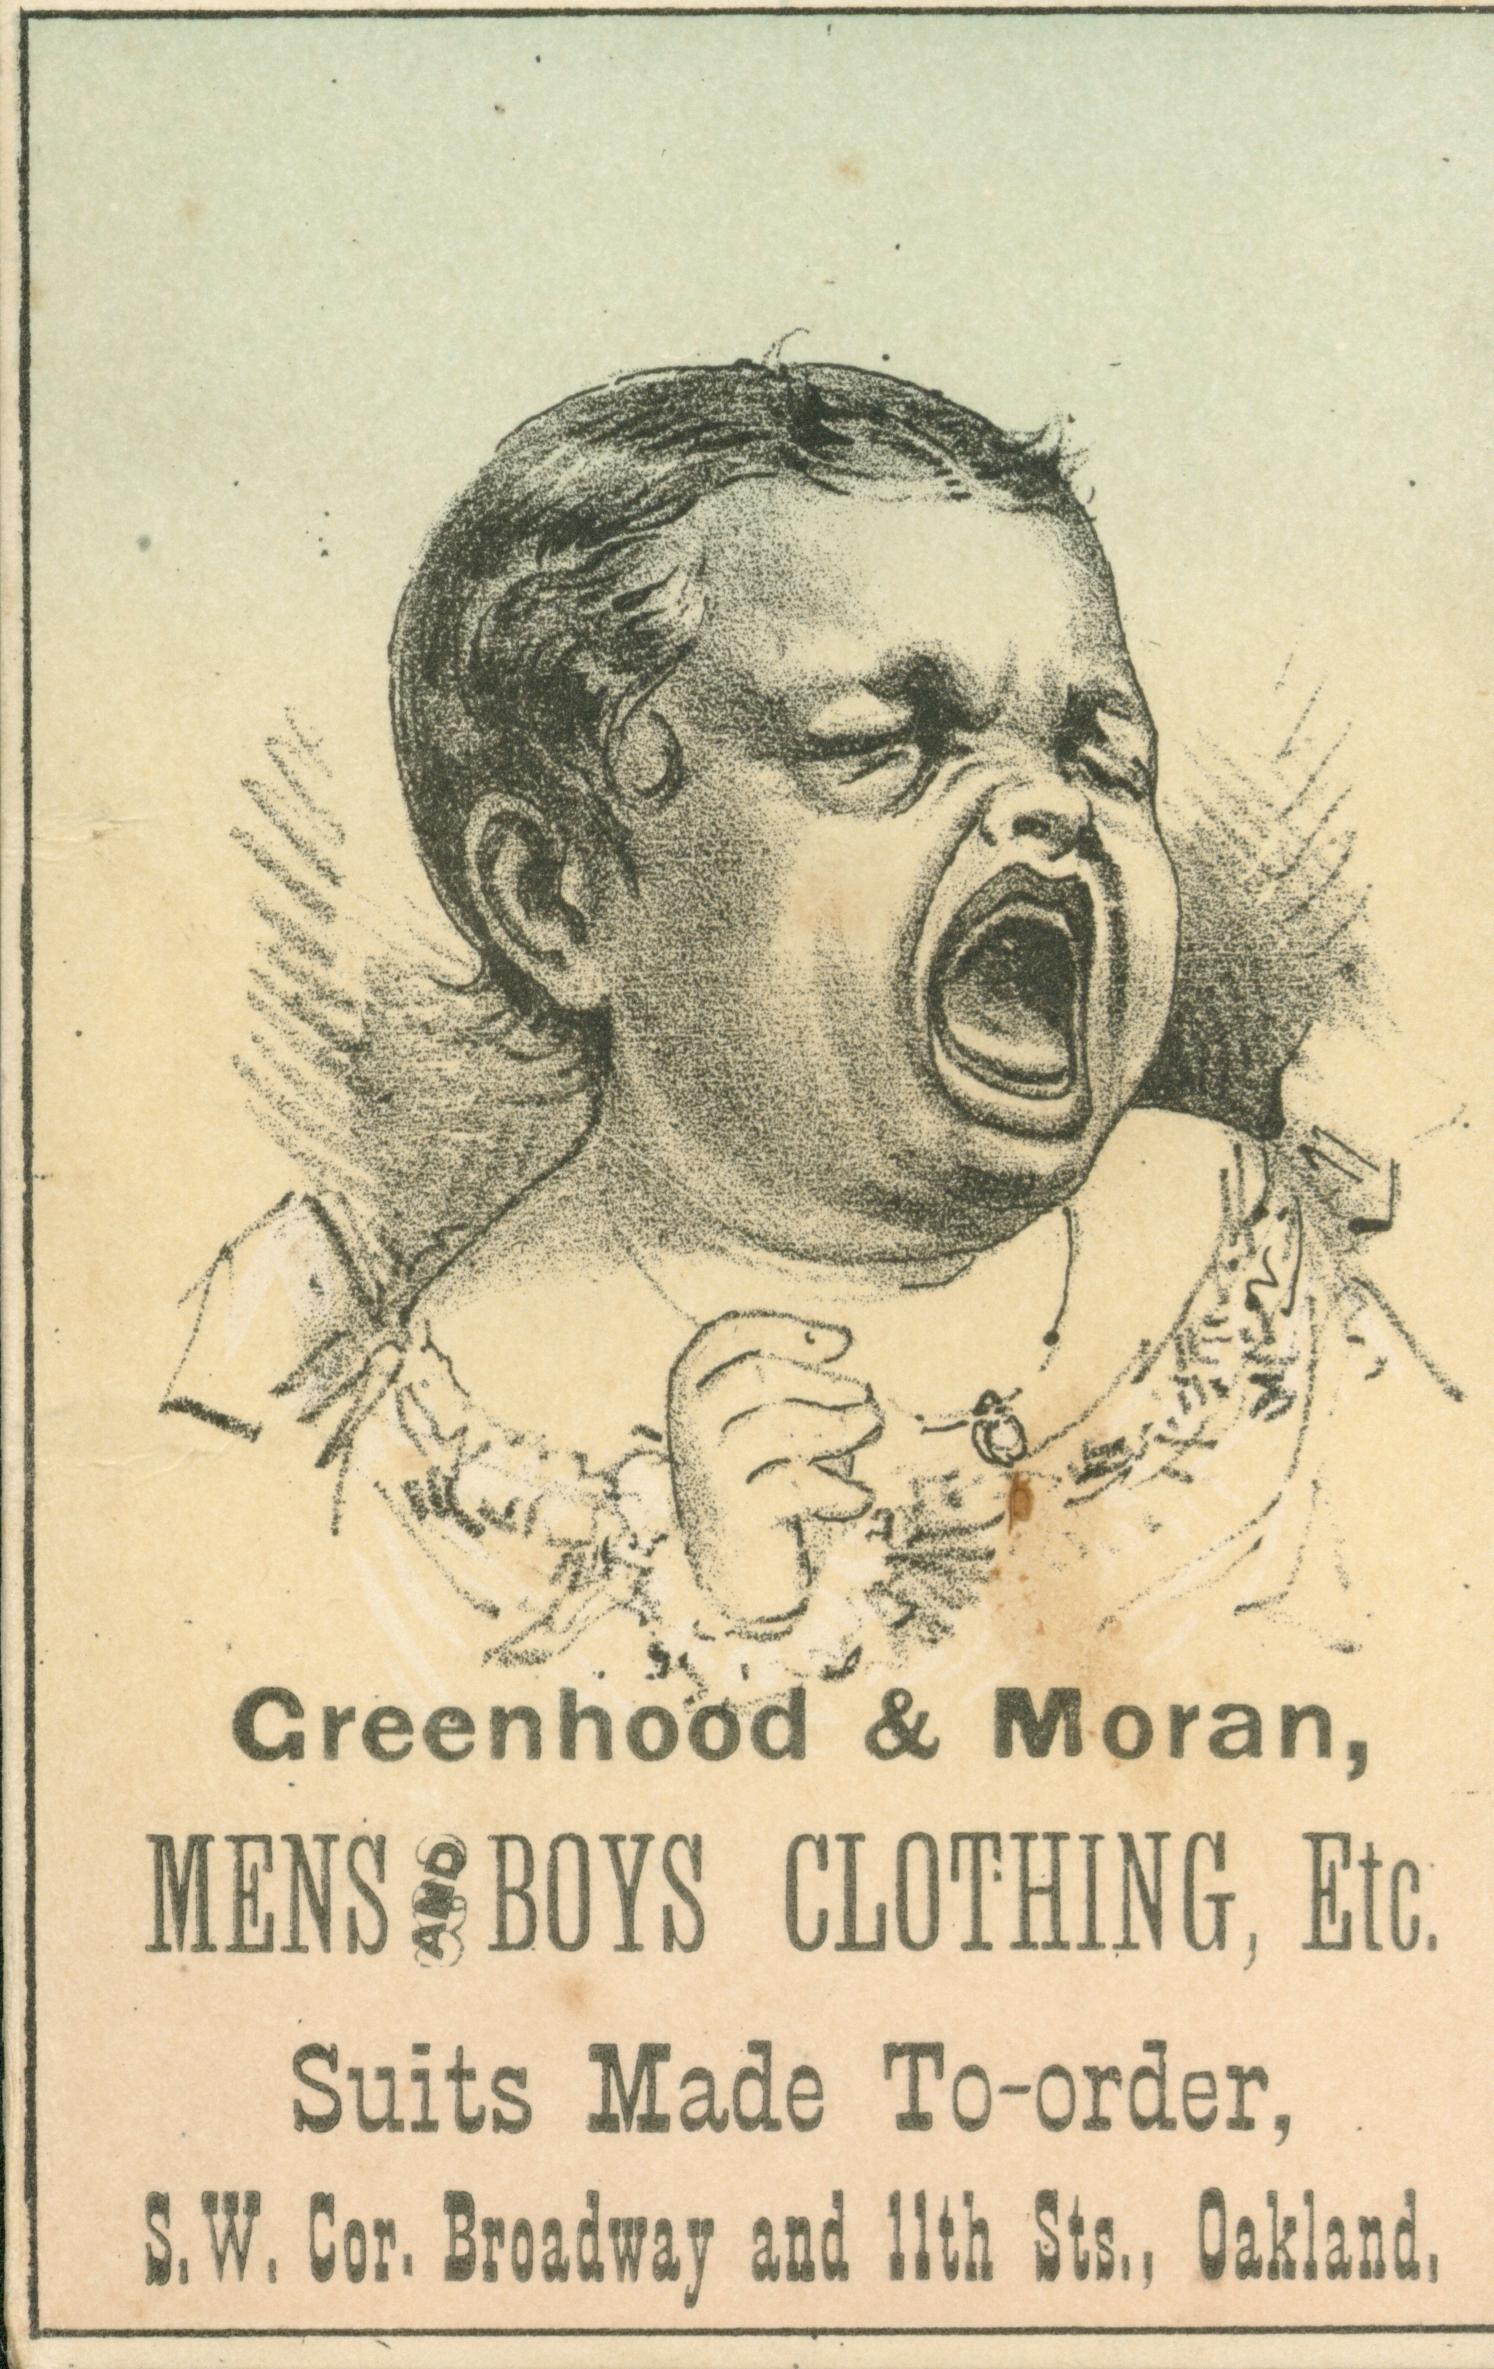 Shows an infant above the company information